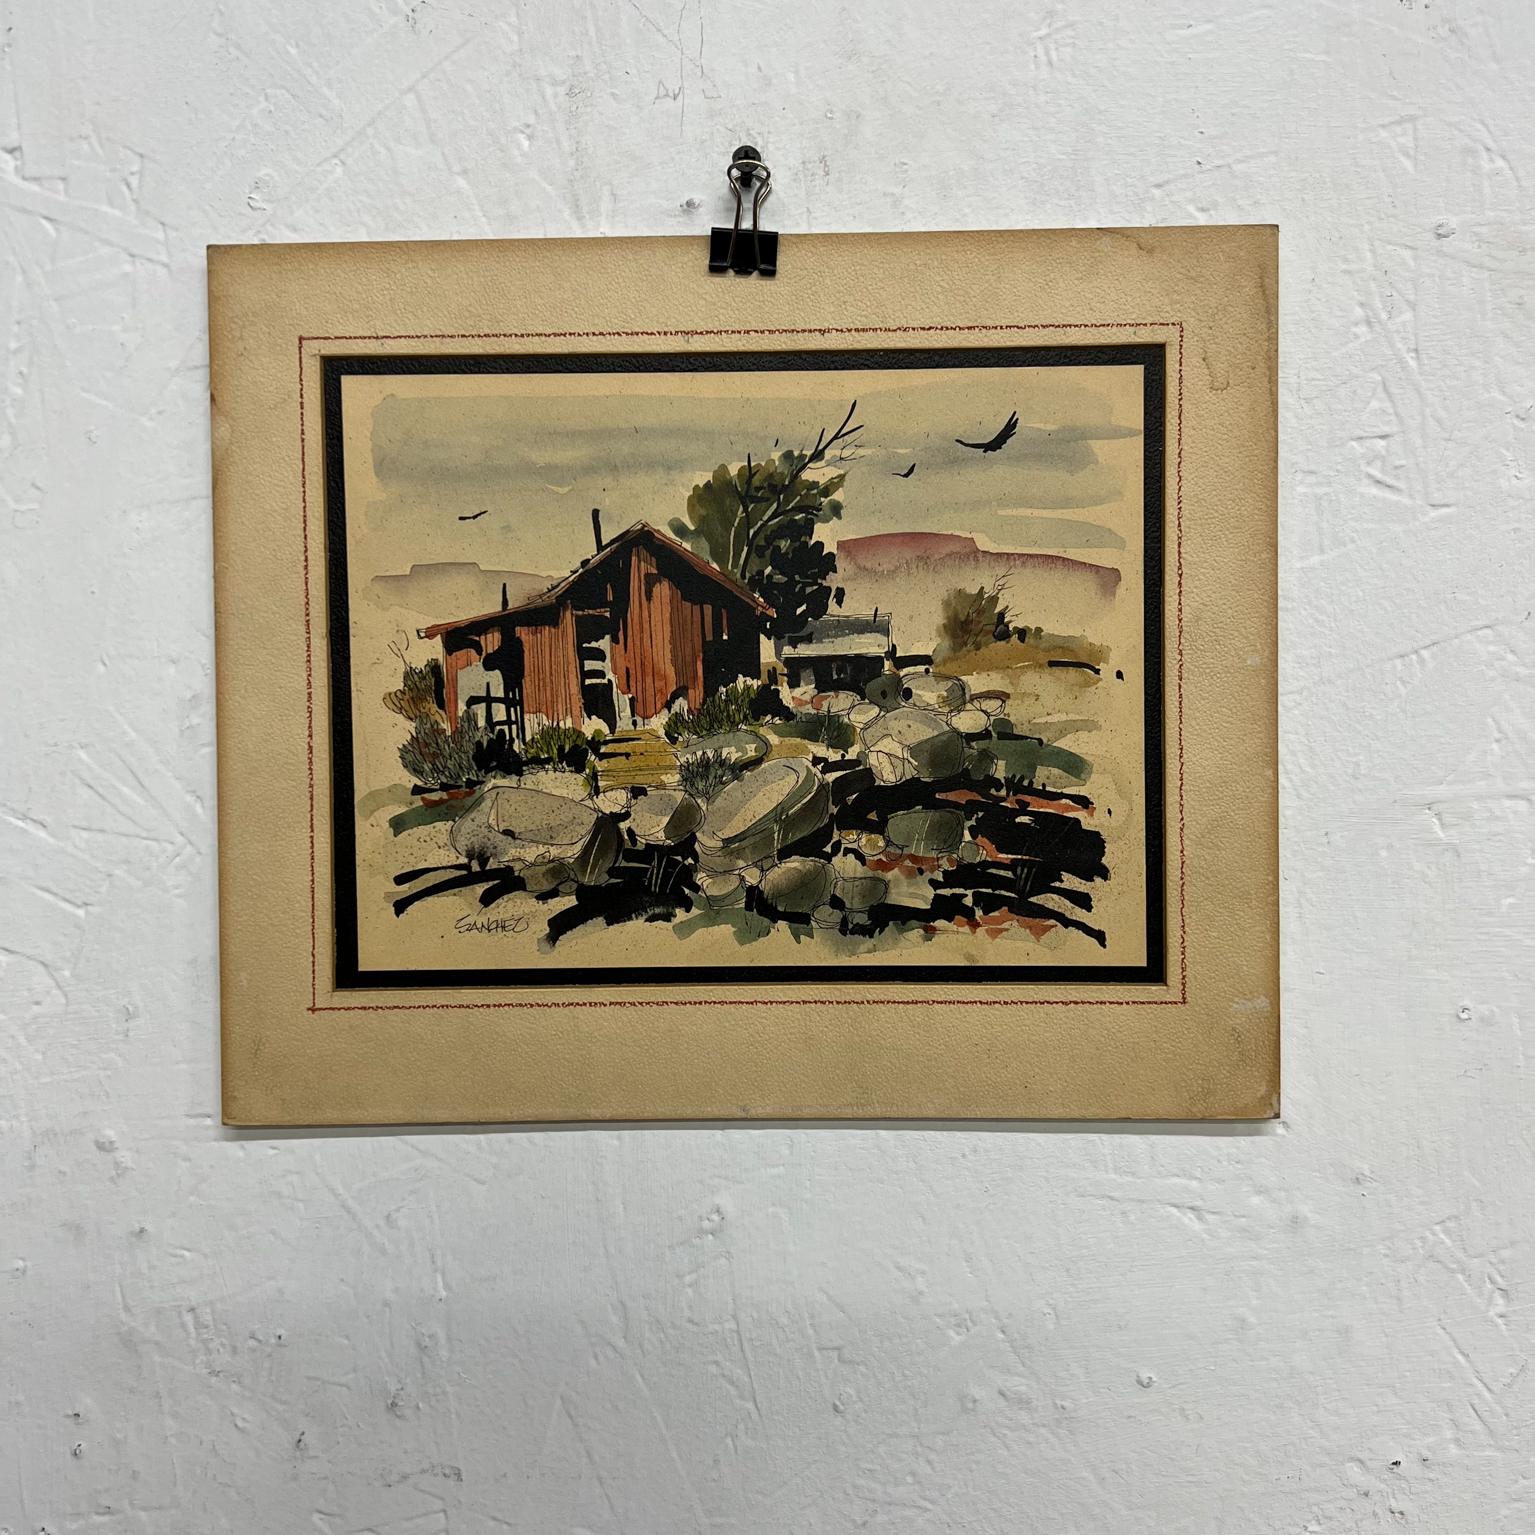 Mid 20th Century Modern Ranch Landscape watercolor black ink on paper signed Sanchez
Mat 12 x 10 art 9.5 x 7.25
Preowned original art vintage condition
See all images.
 